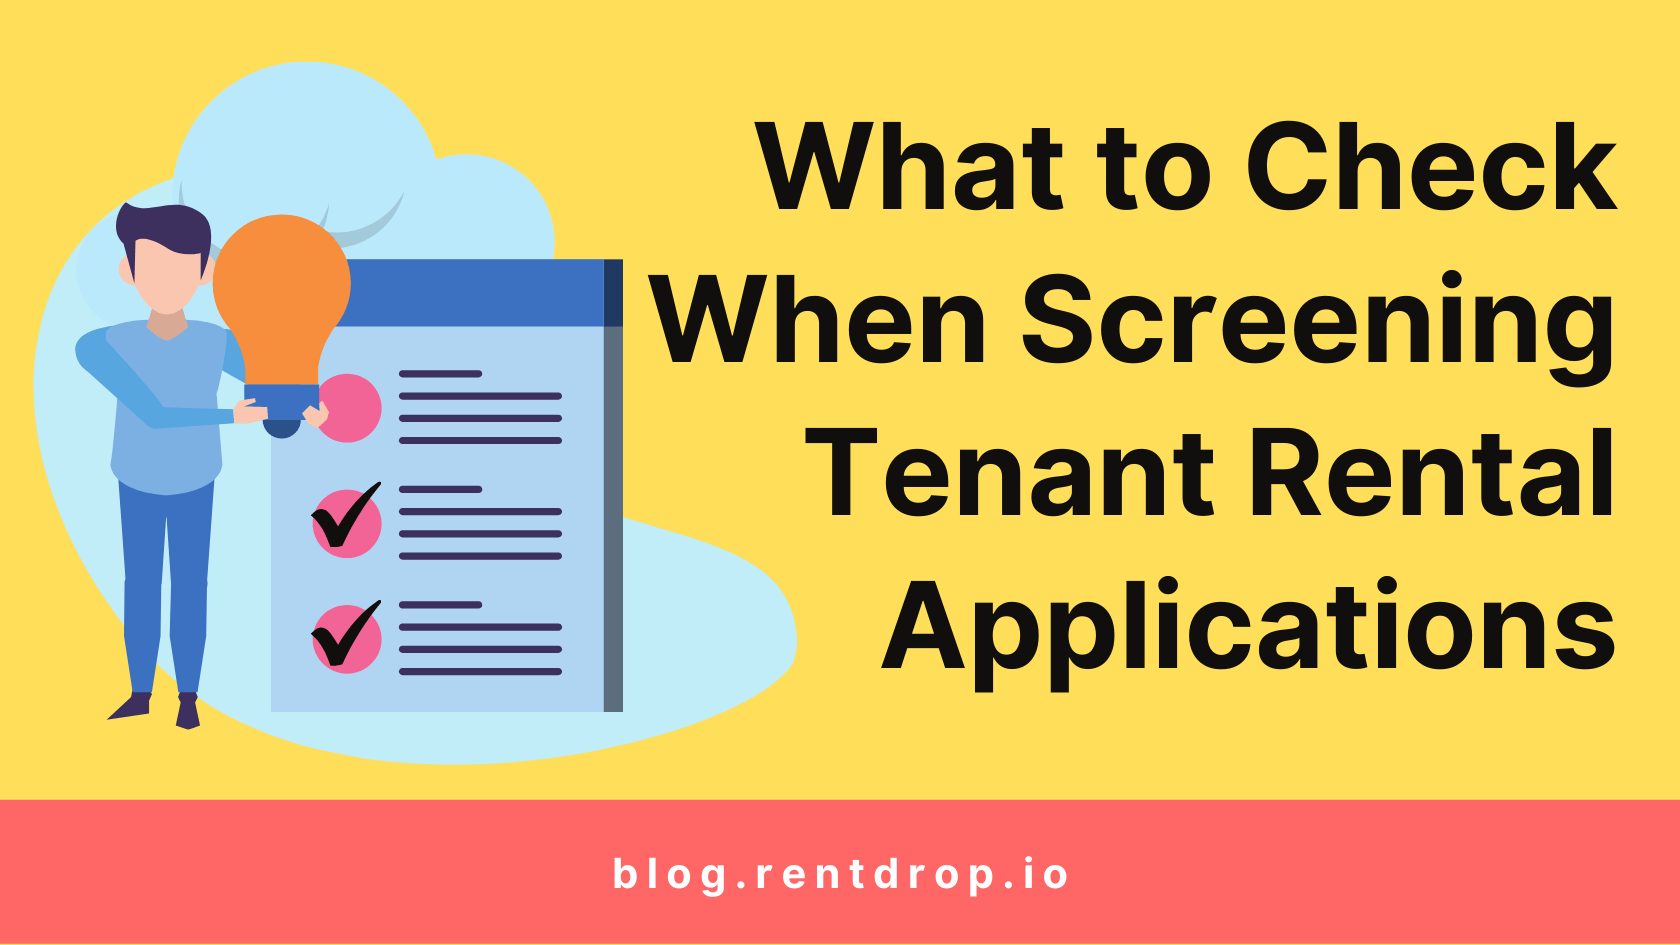 What to Check When Screening Tenant Rental Applications